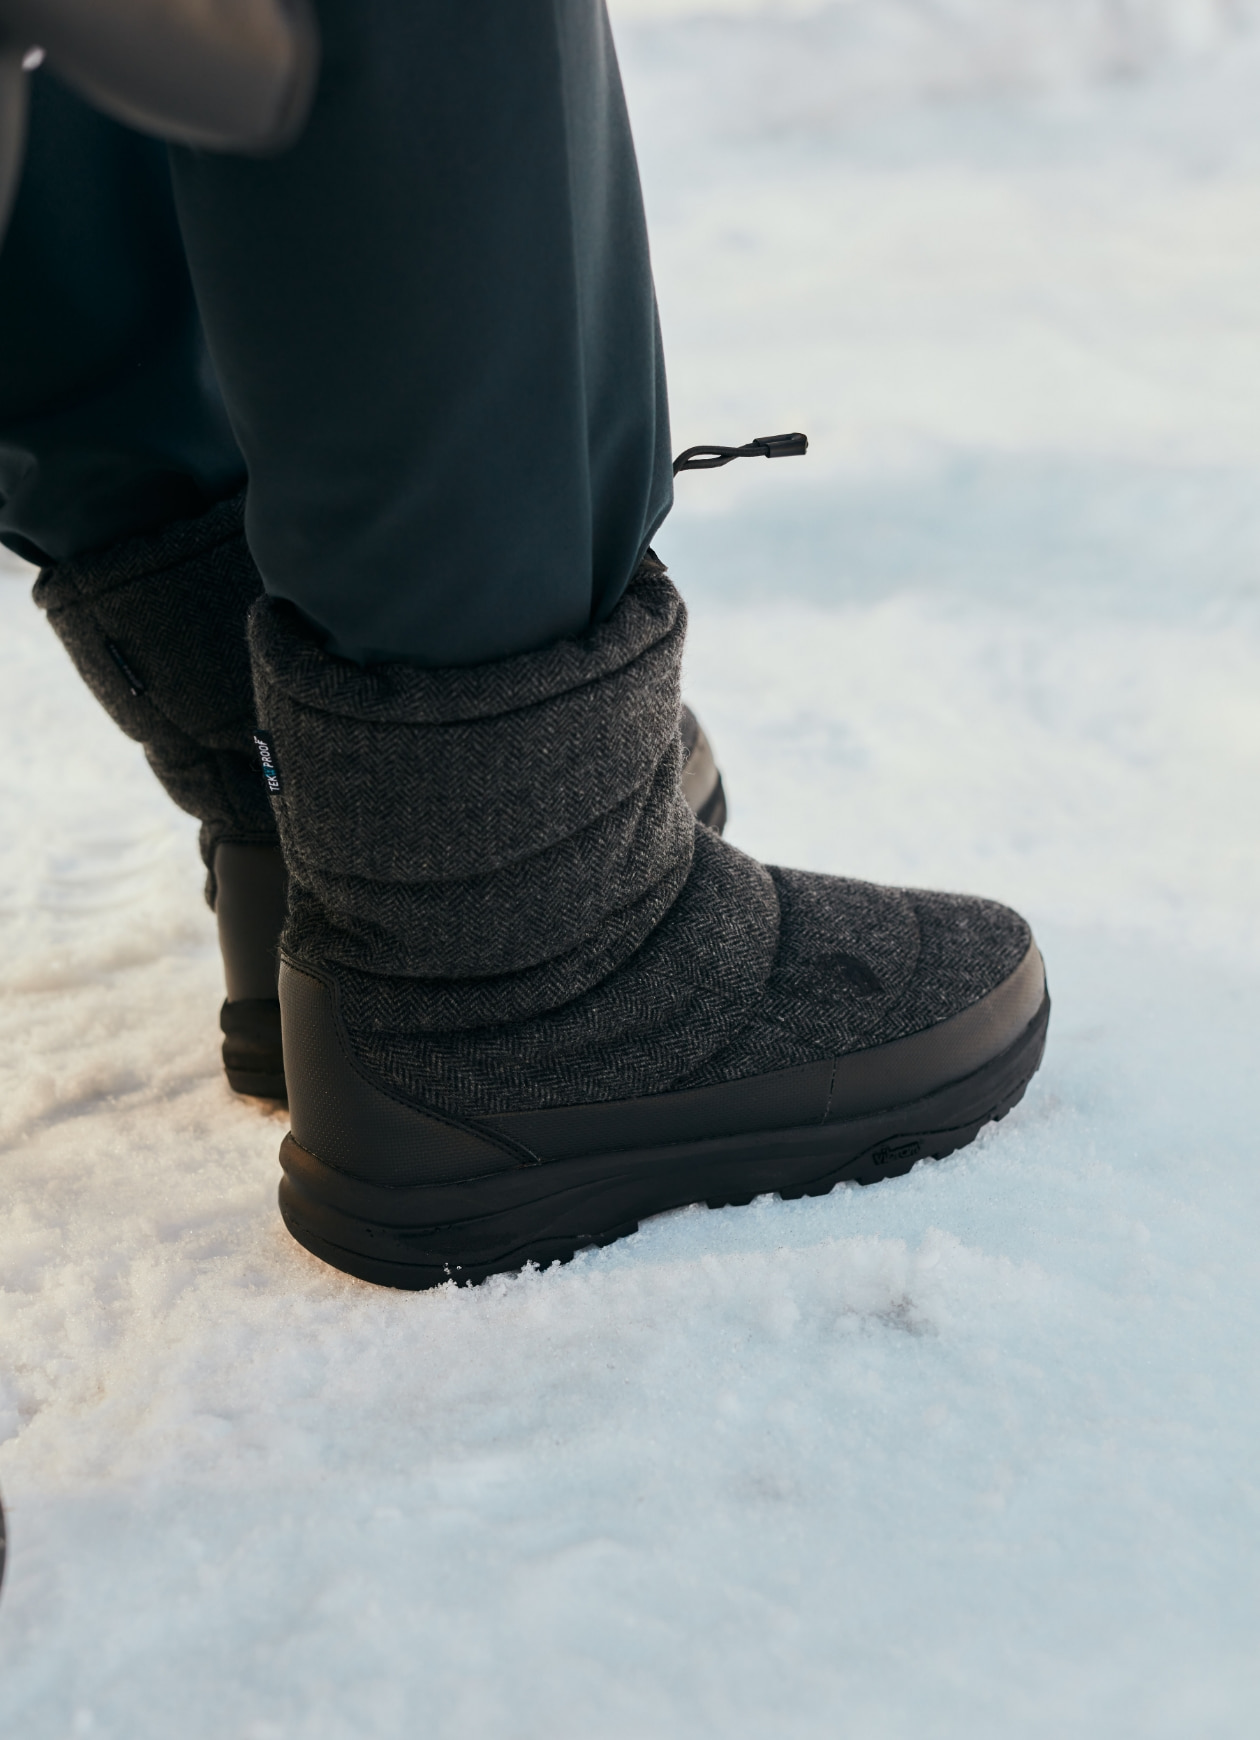 Nuptse Bootie WP VII | Online Camp Store | THE NORTH FACE CAMP